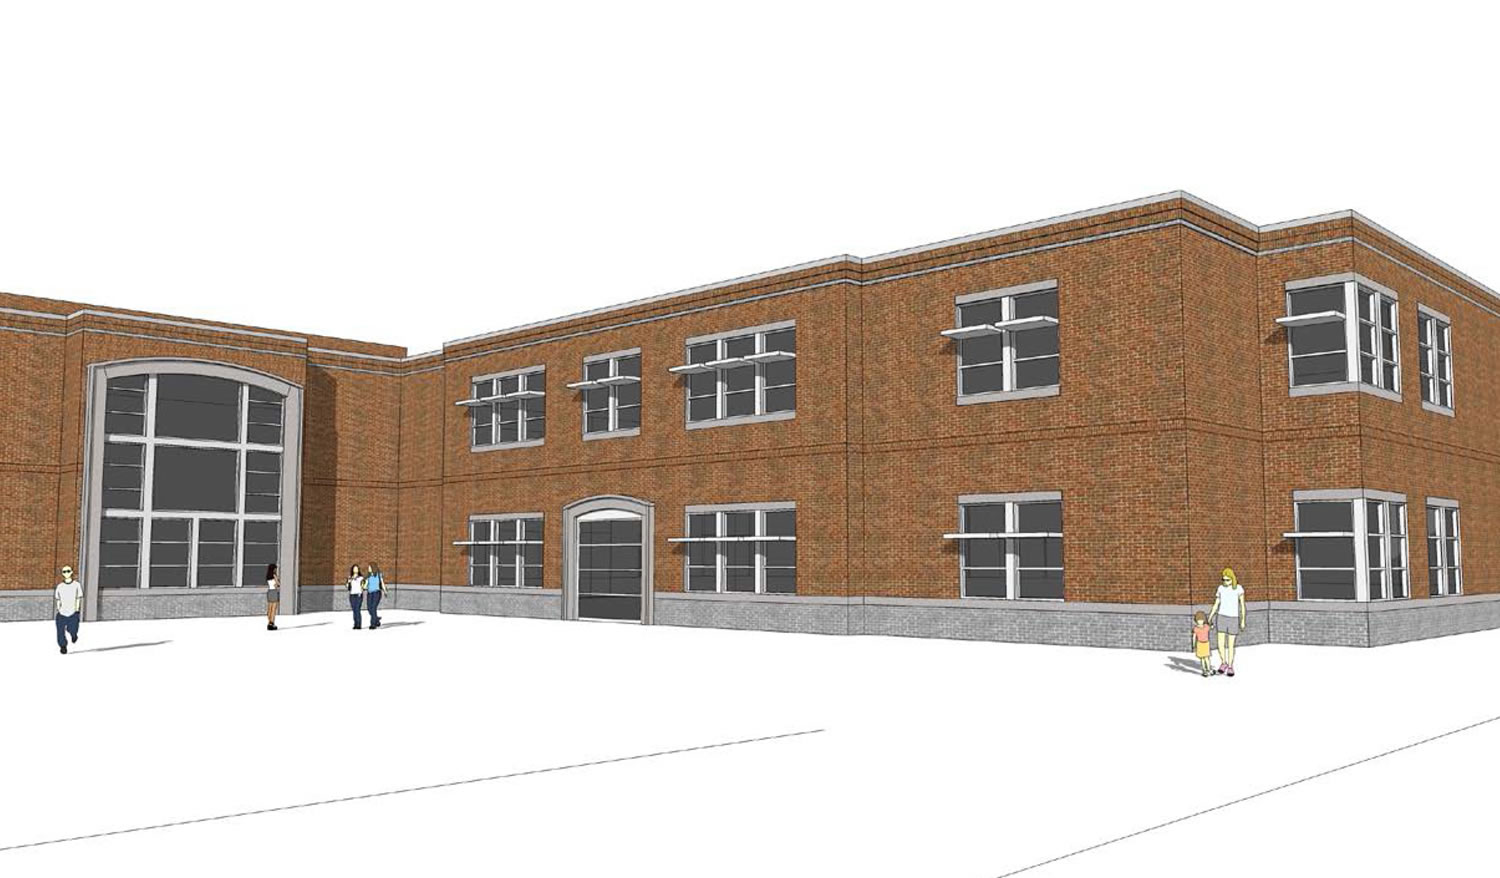 A new building for South Ridge Elementary School is part of Ridgefield School District's plans for $49 million in capital improvements at the district.